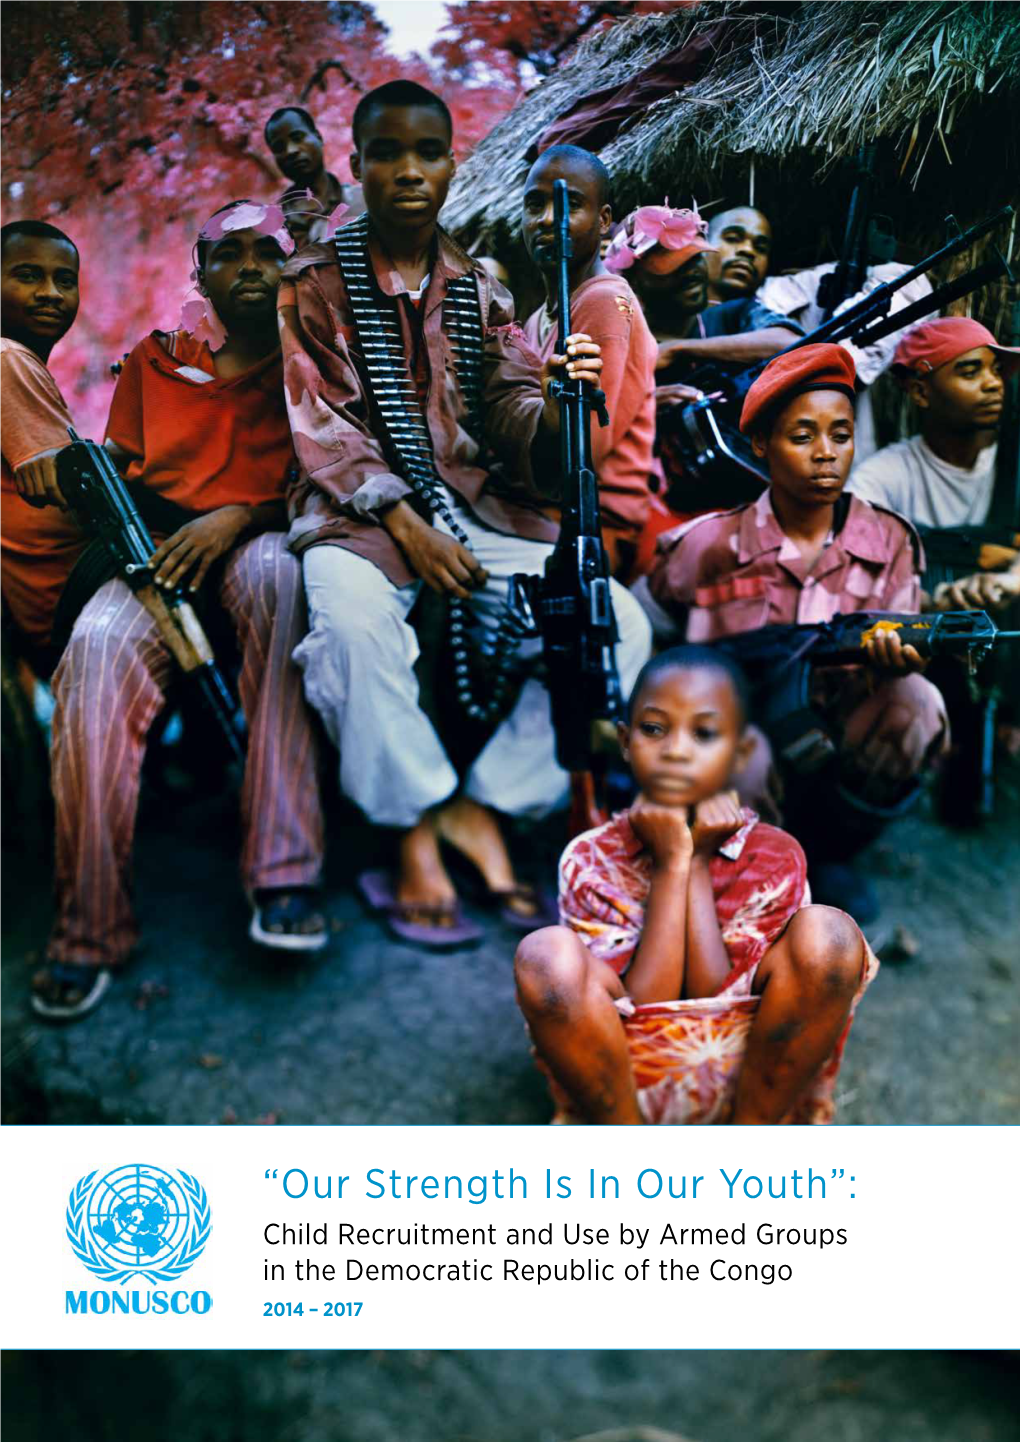 “Our Strength Is in Our Youth”